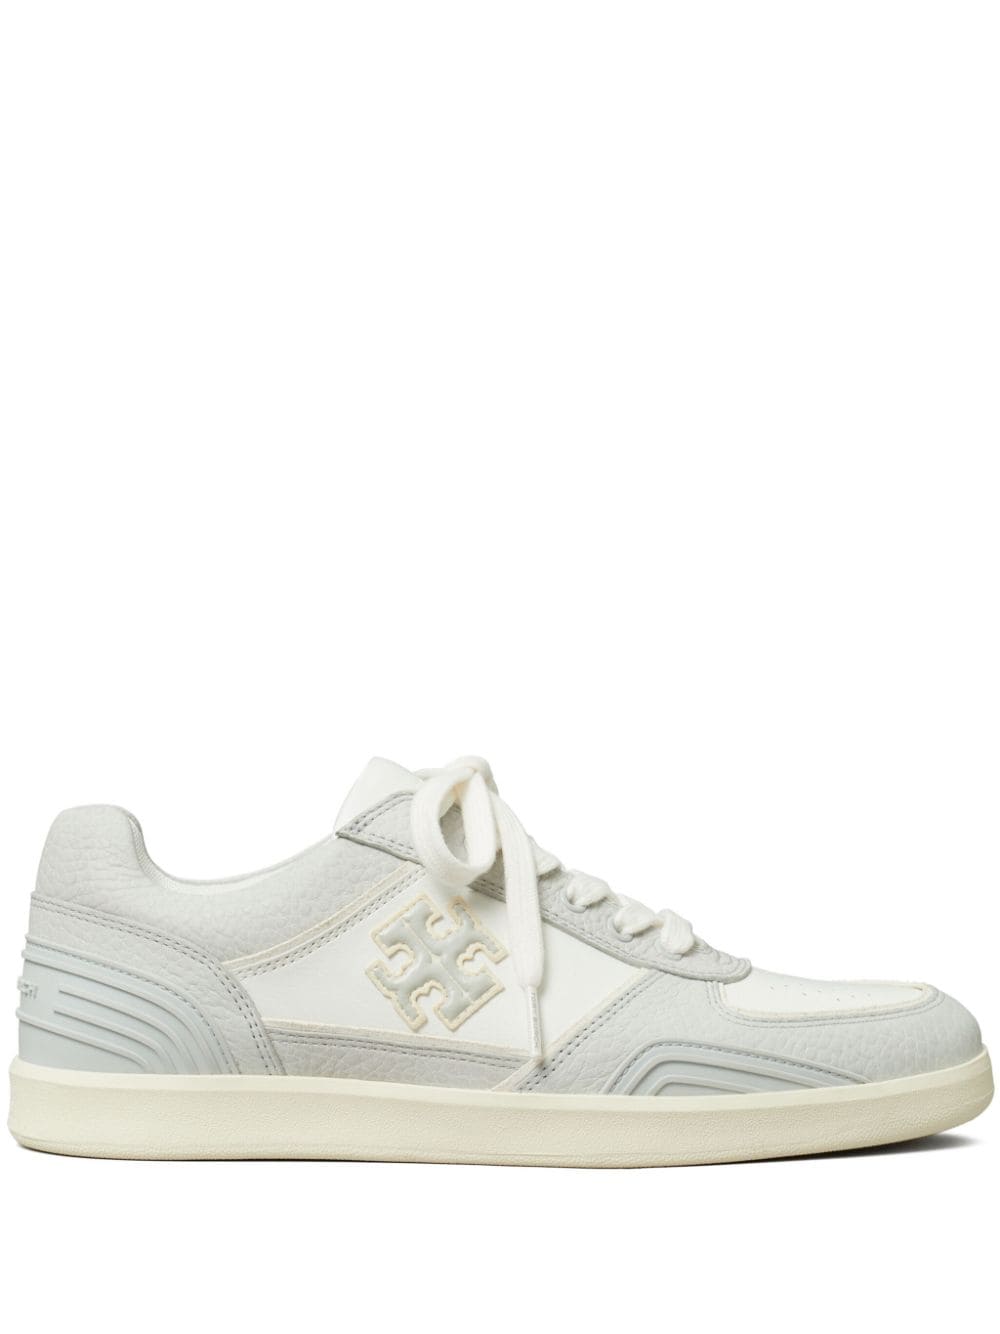 Tory Burch Clover Court panelled sneakers - Blue von Tory Burch